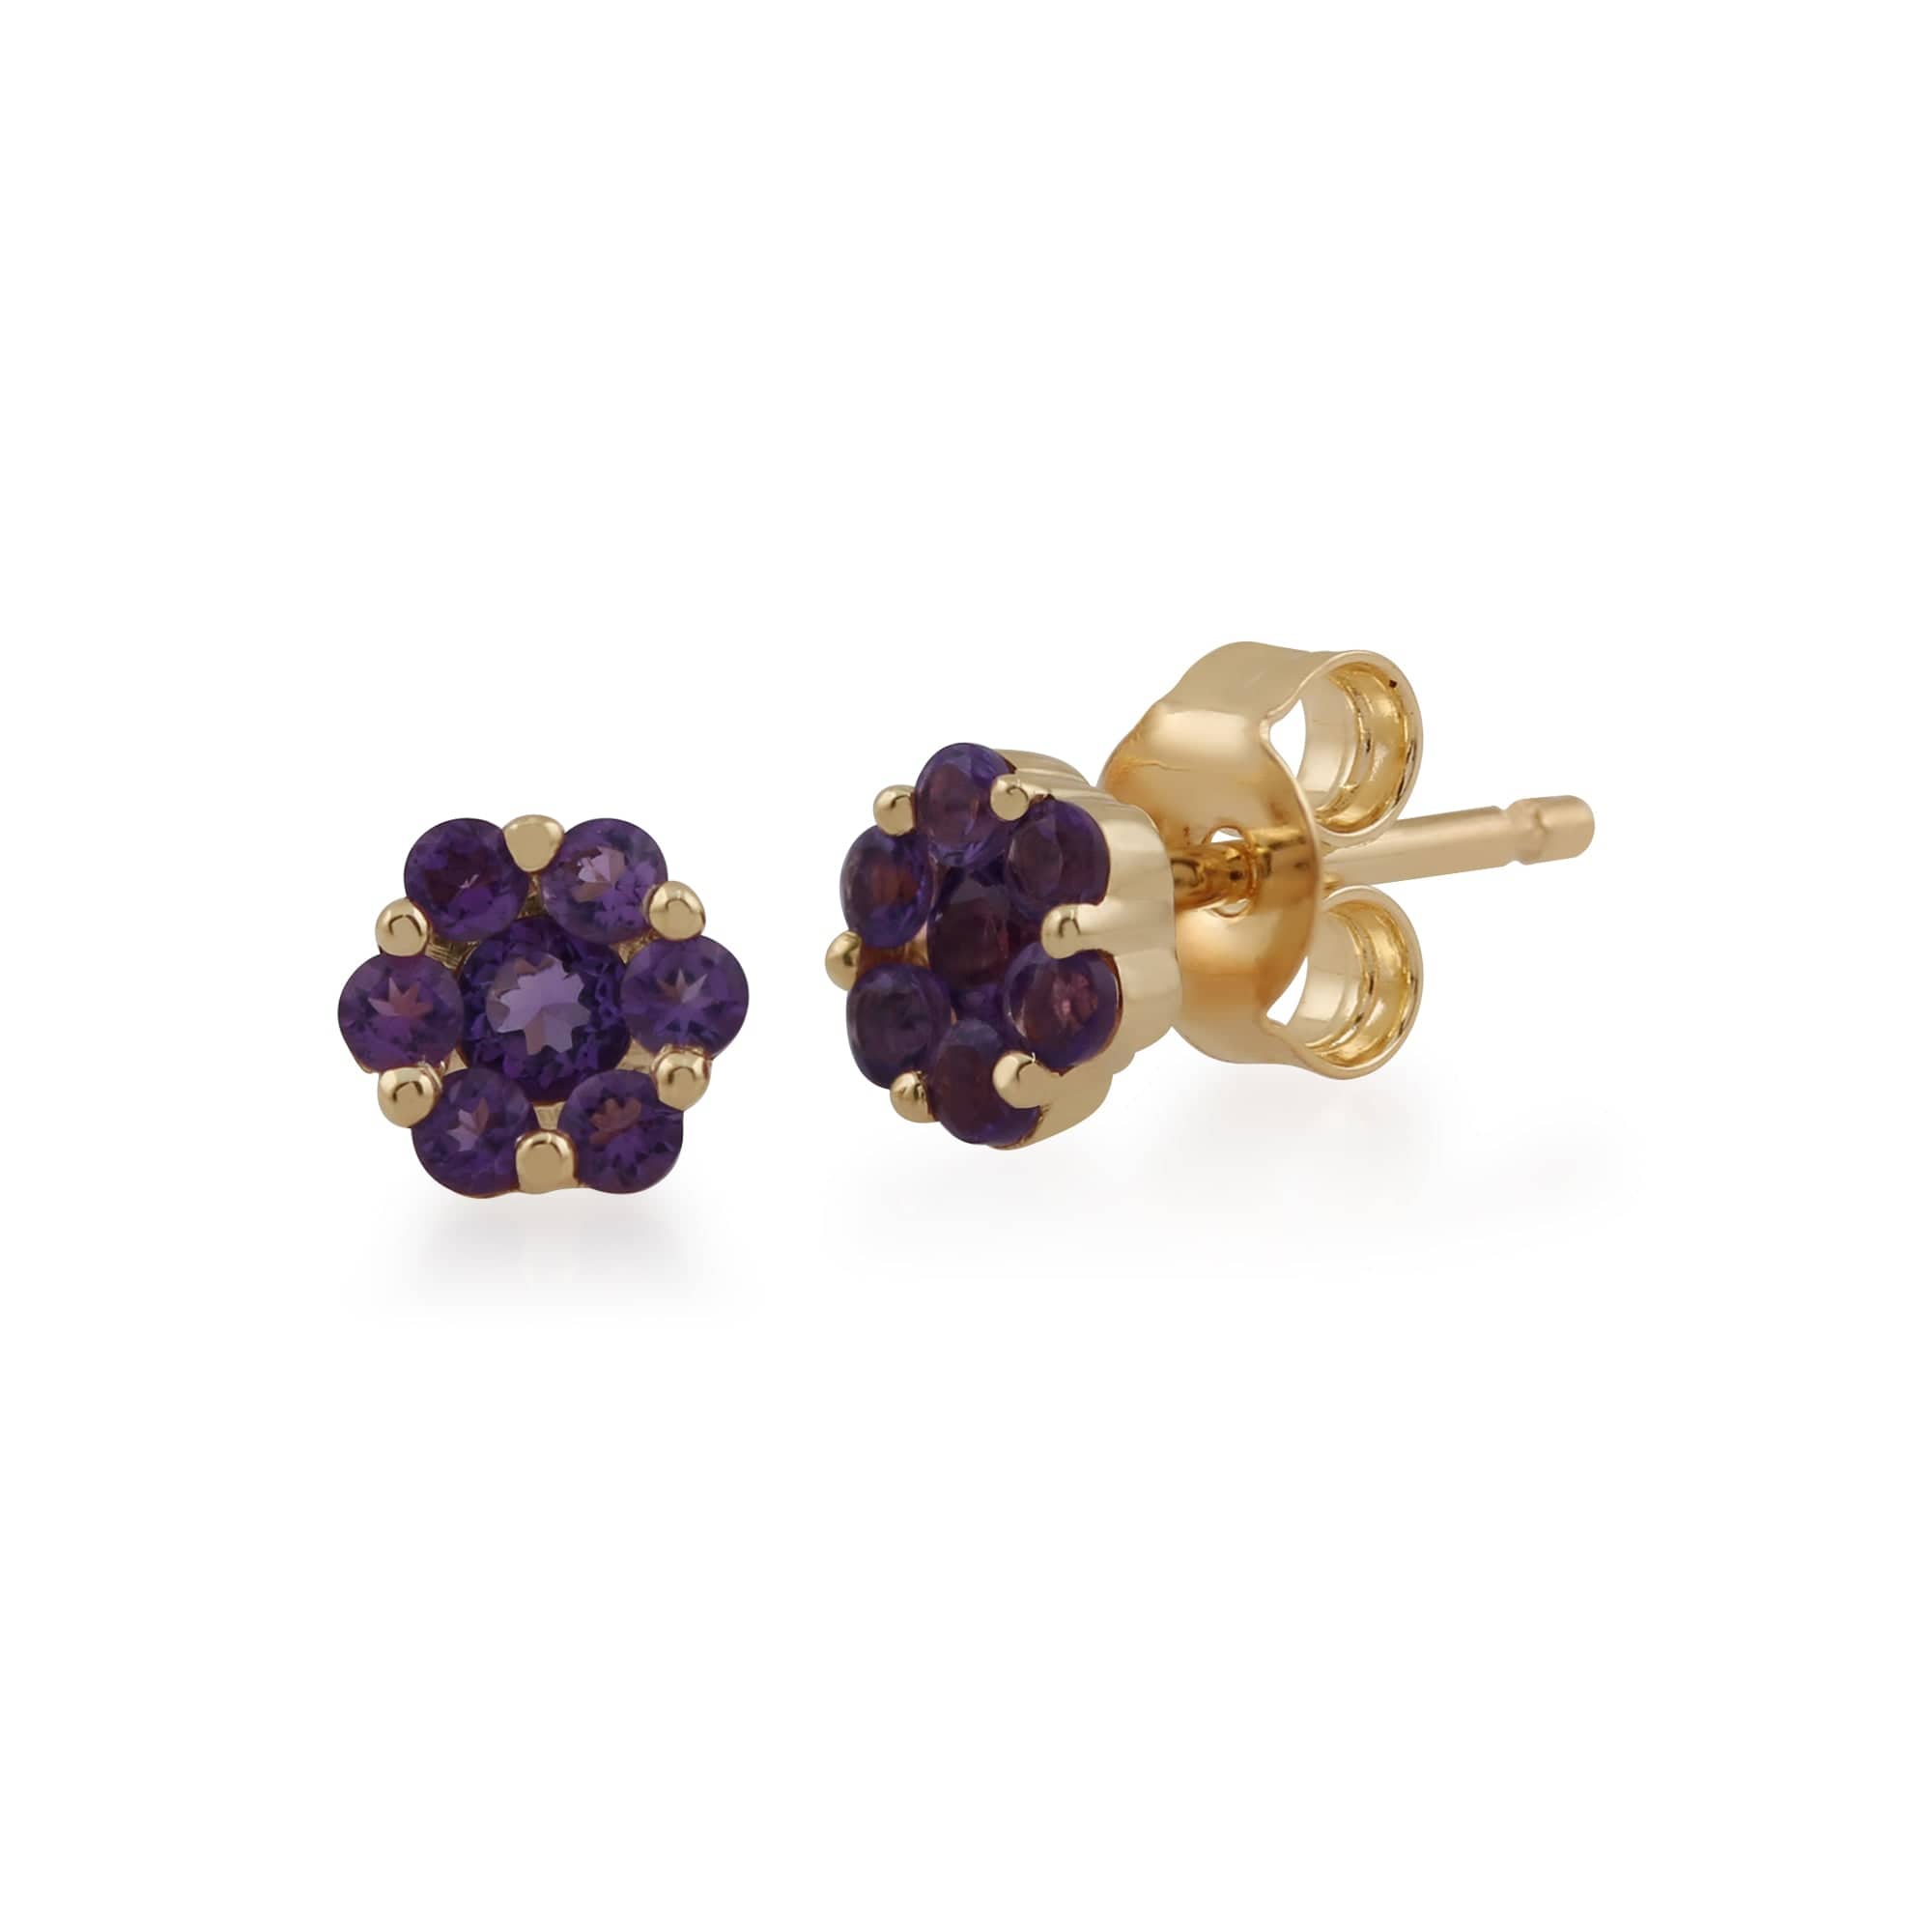 Floral Round Amethyst Cluster Stud Earrings in 9ct Yellow Gold - Gemondo